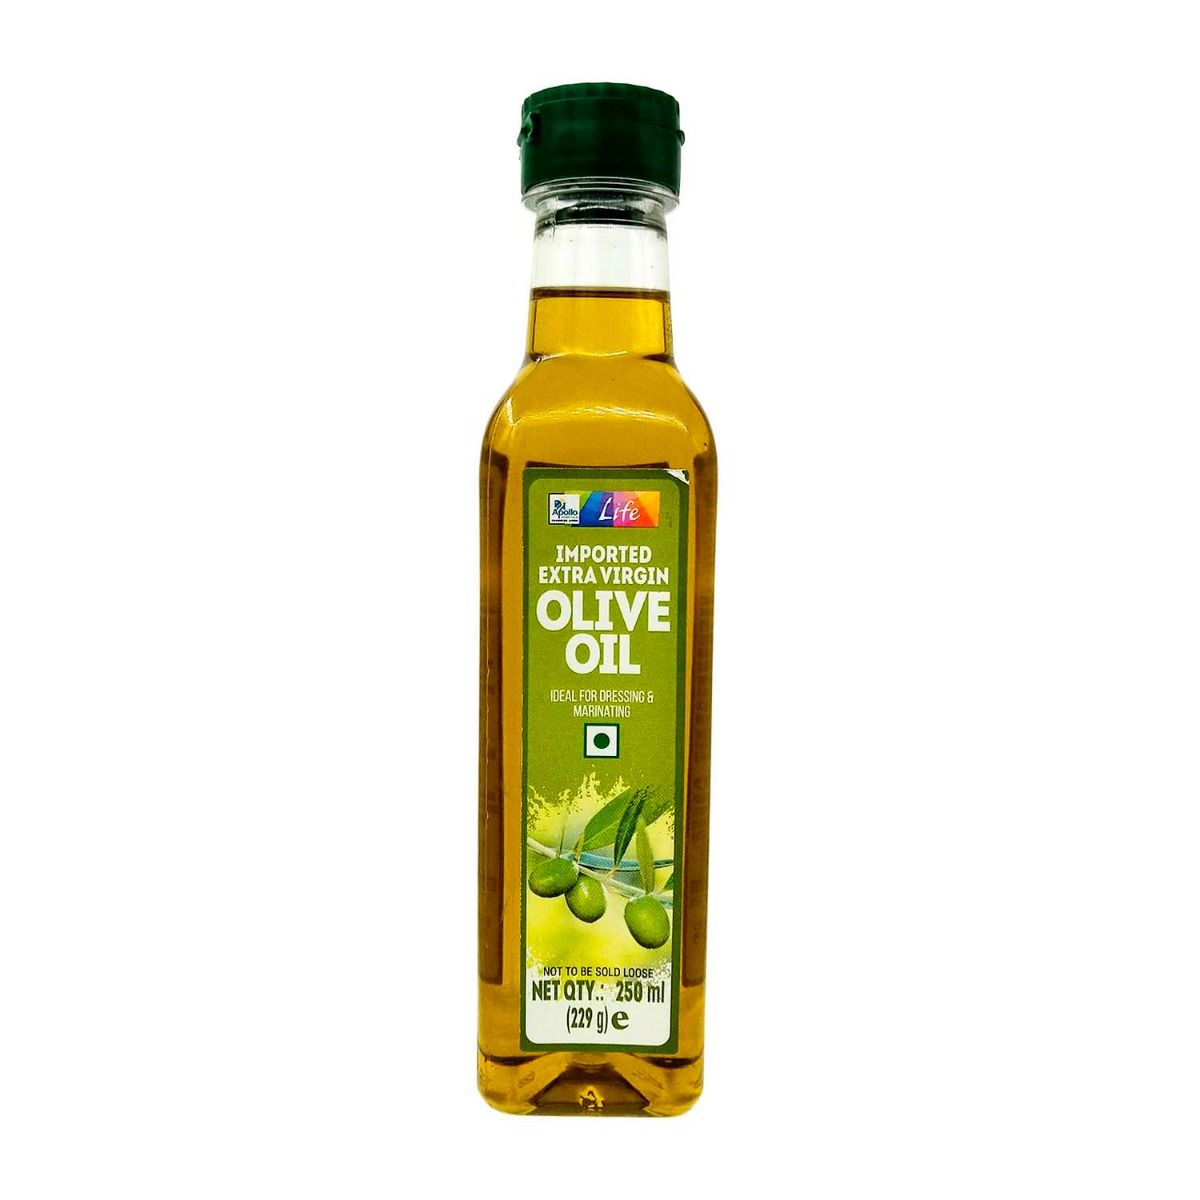 Apollo Life Extra Virgin Olive Oil, 250 ml, Pack of 1 